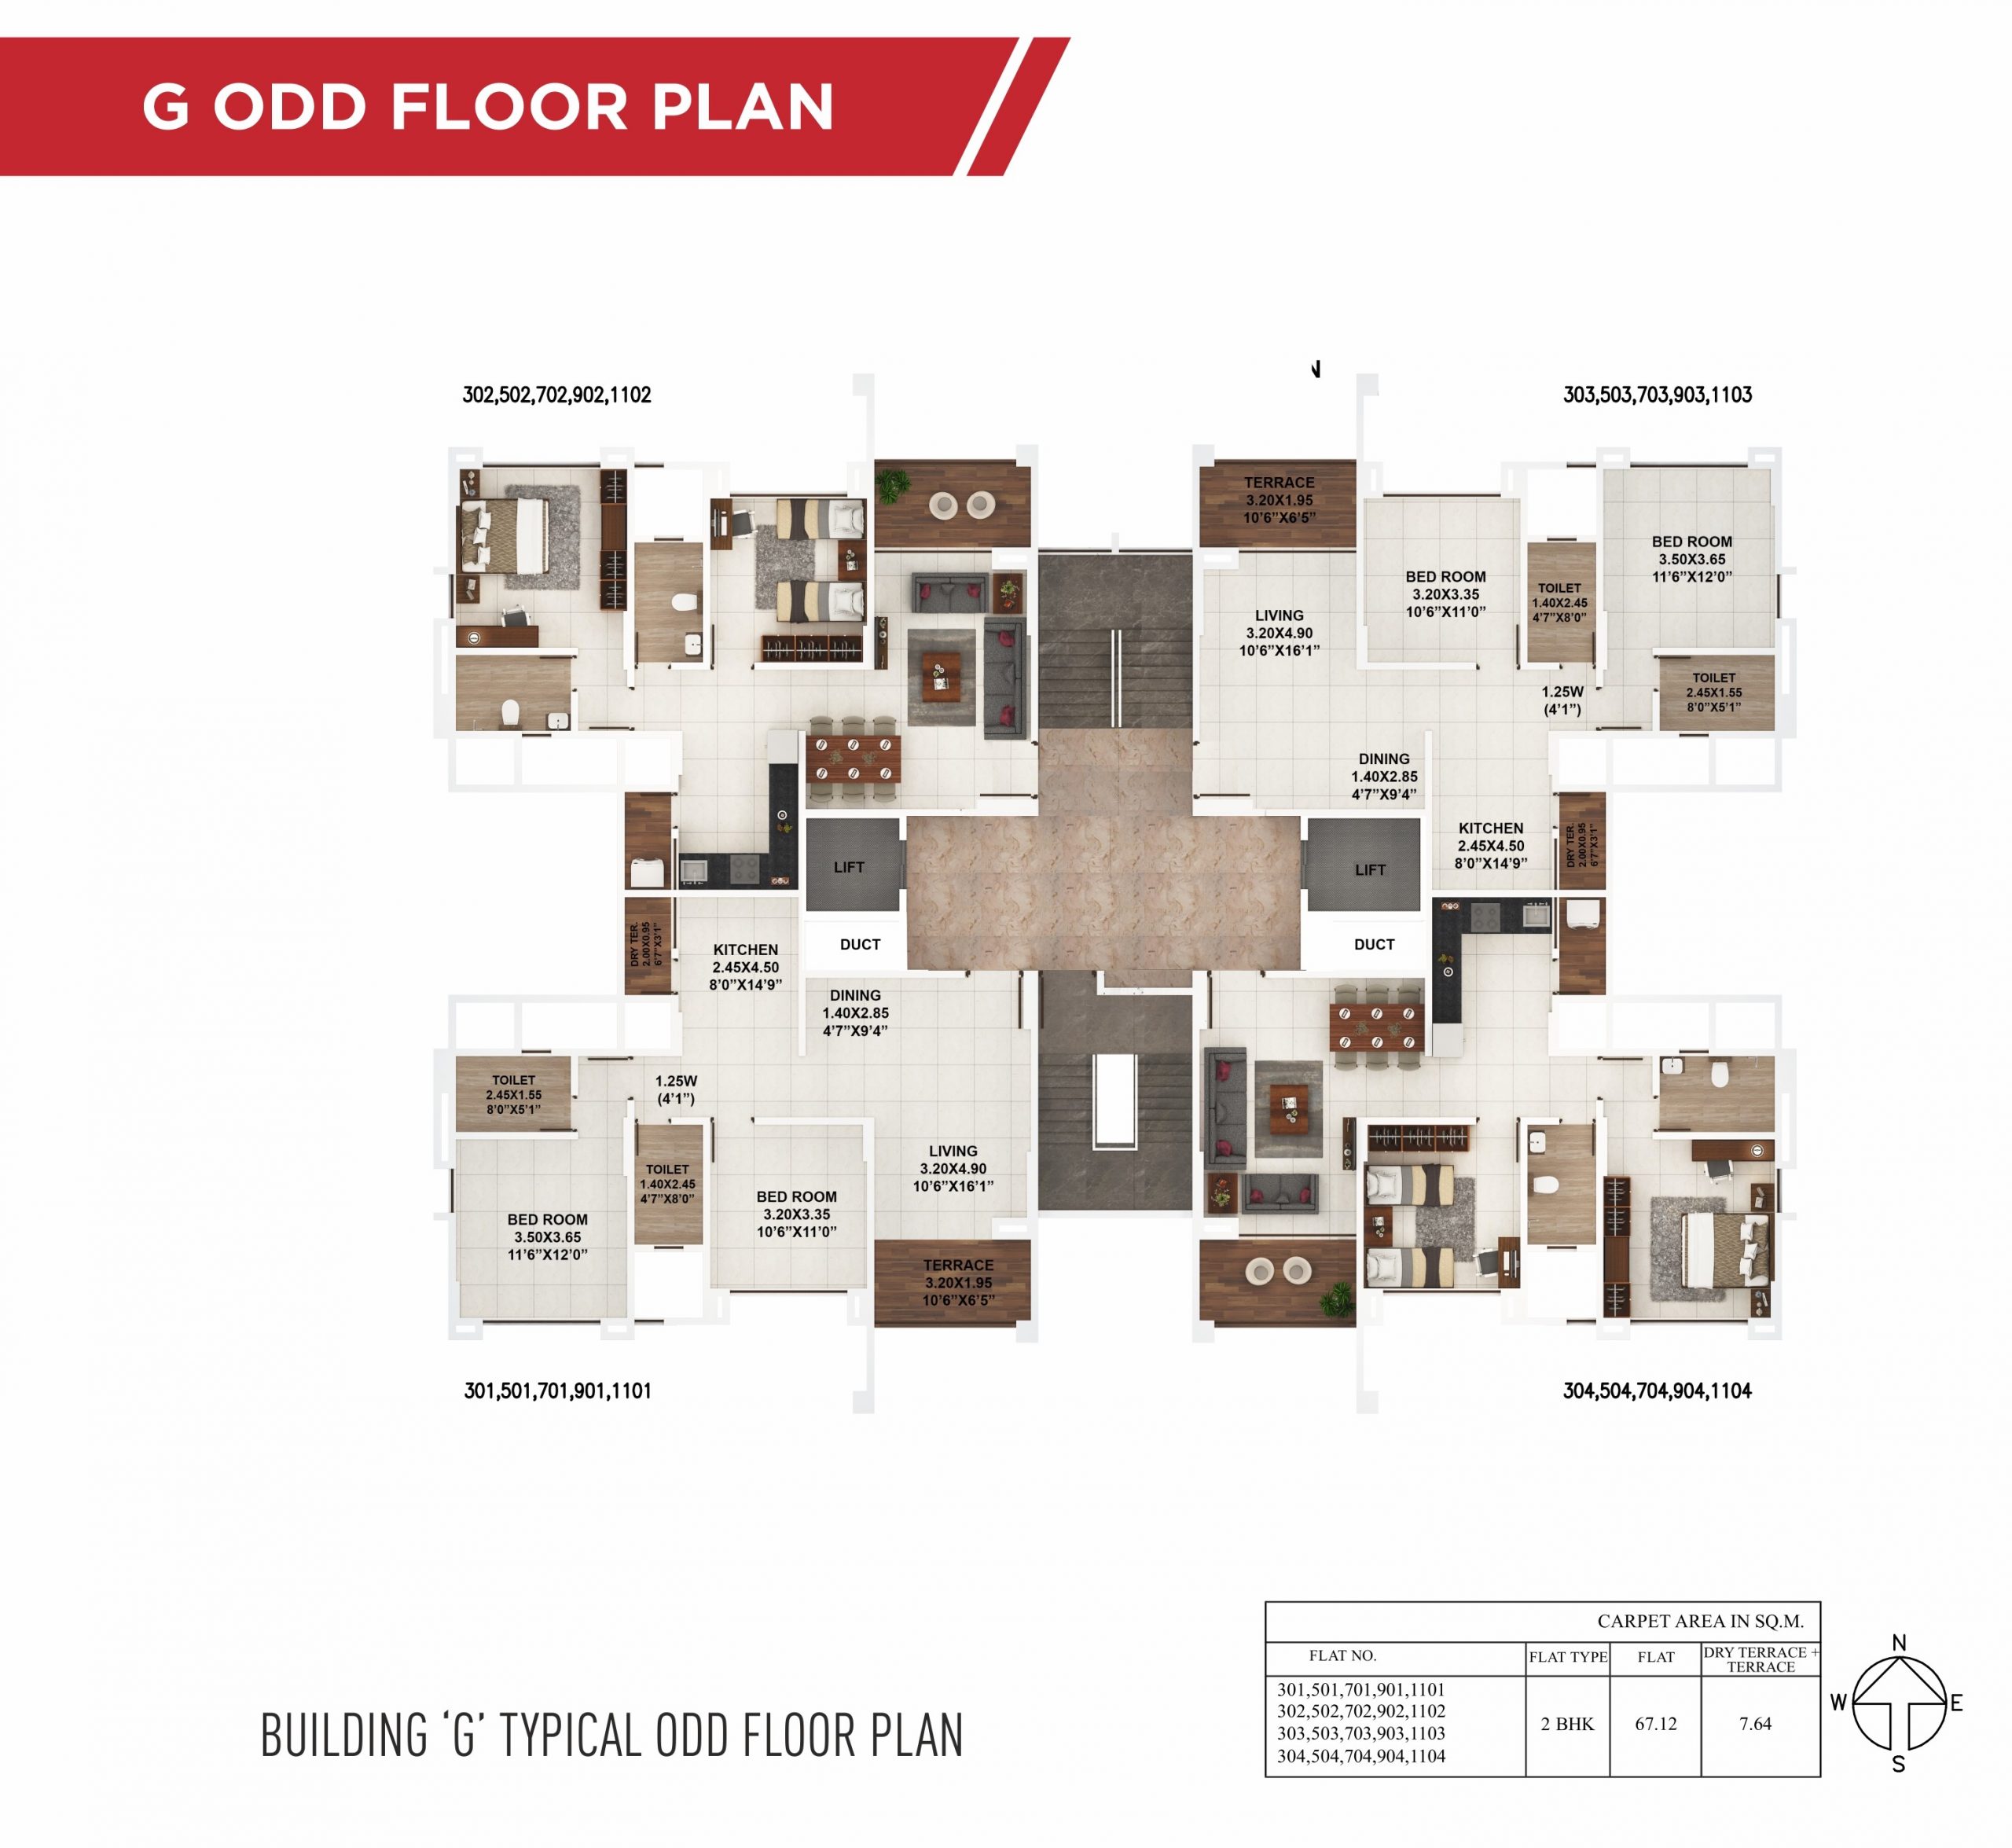 Tower G odd floor plan (from mail jpg) piccadily 24_8_21